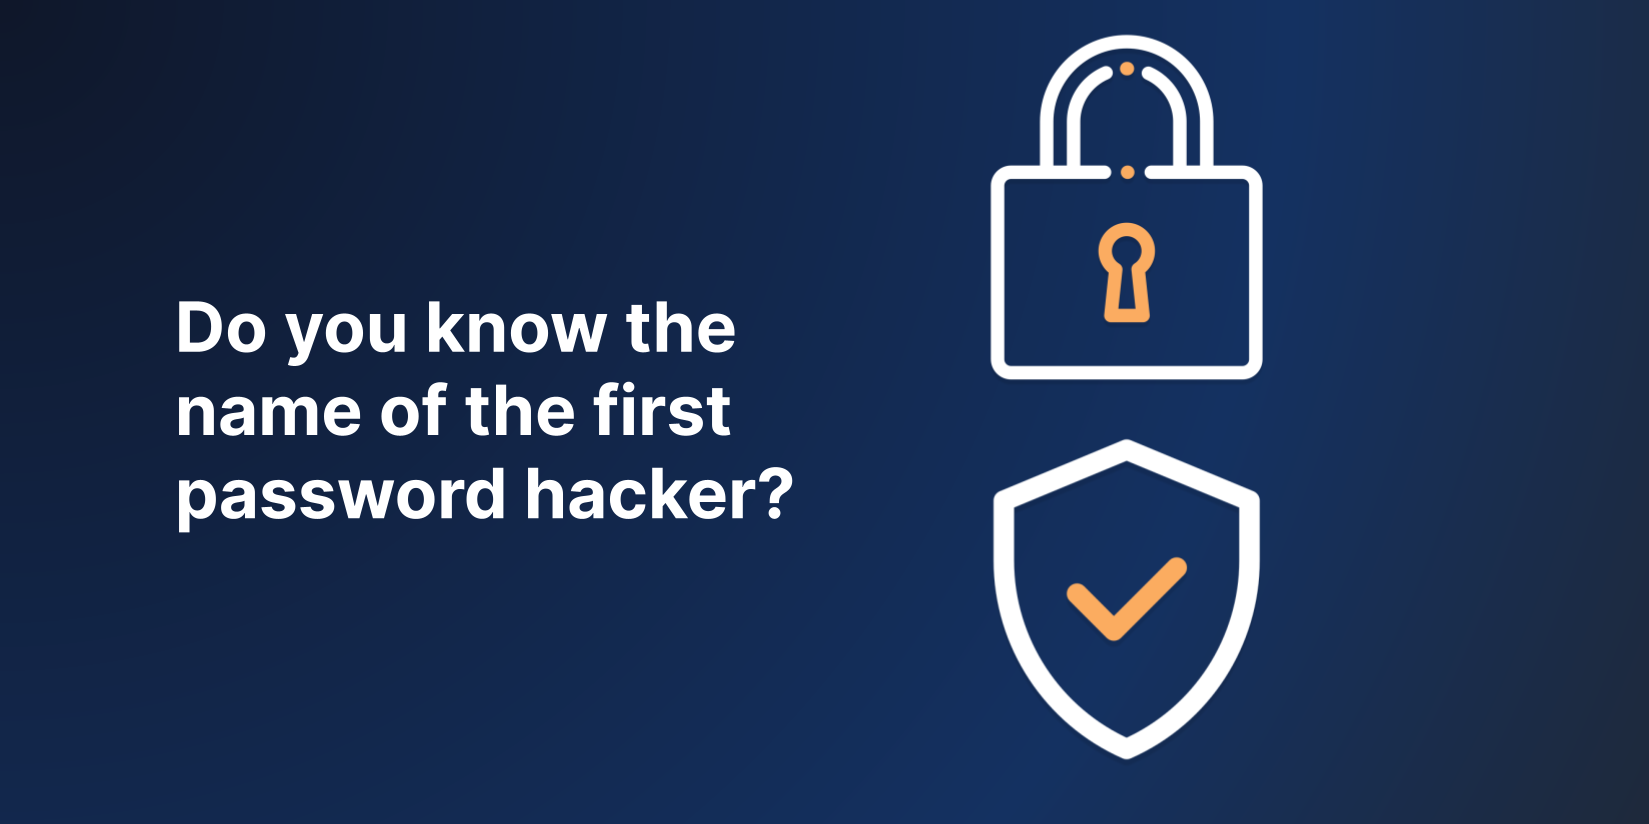 The first password to be hacked